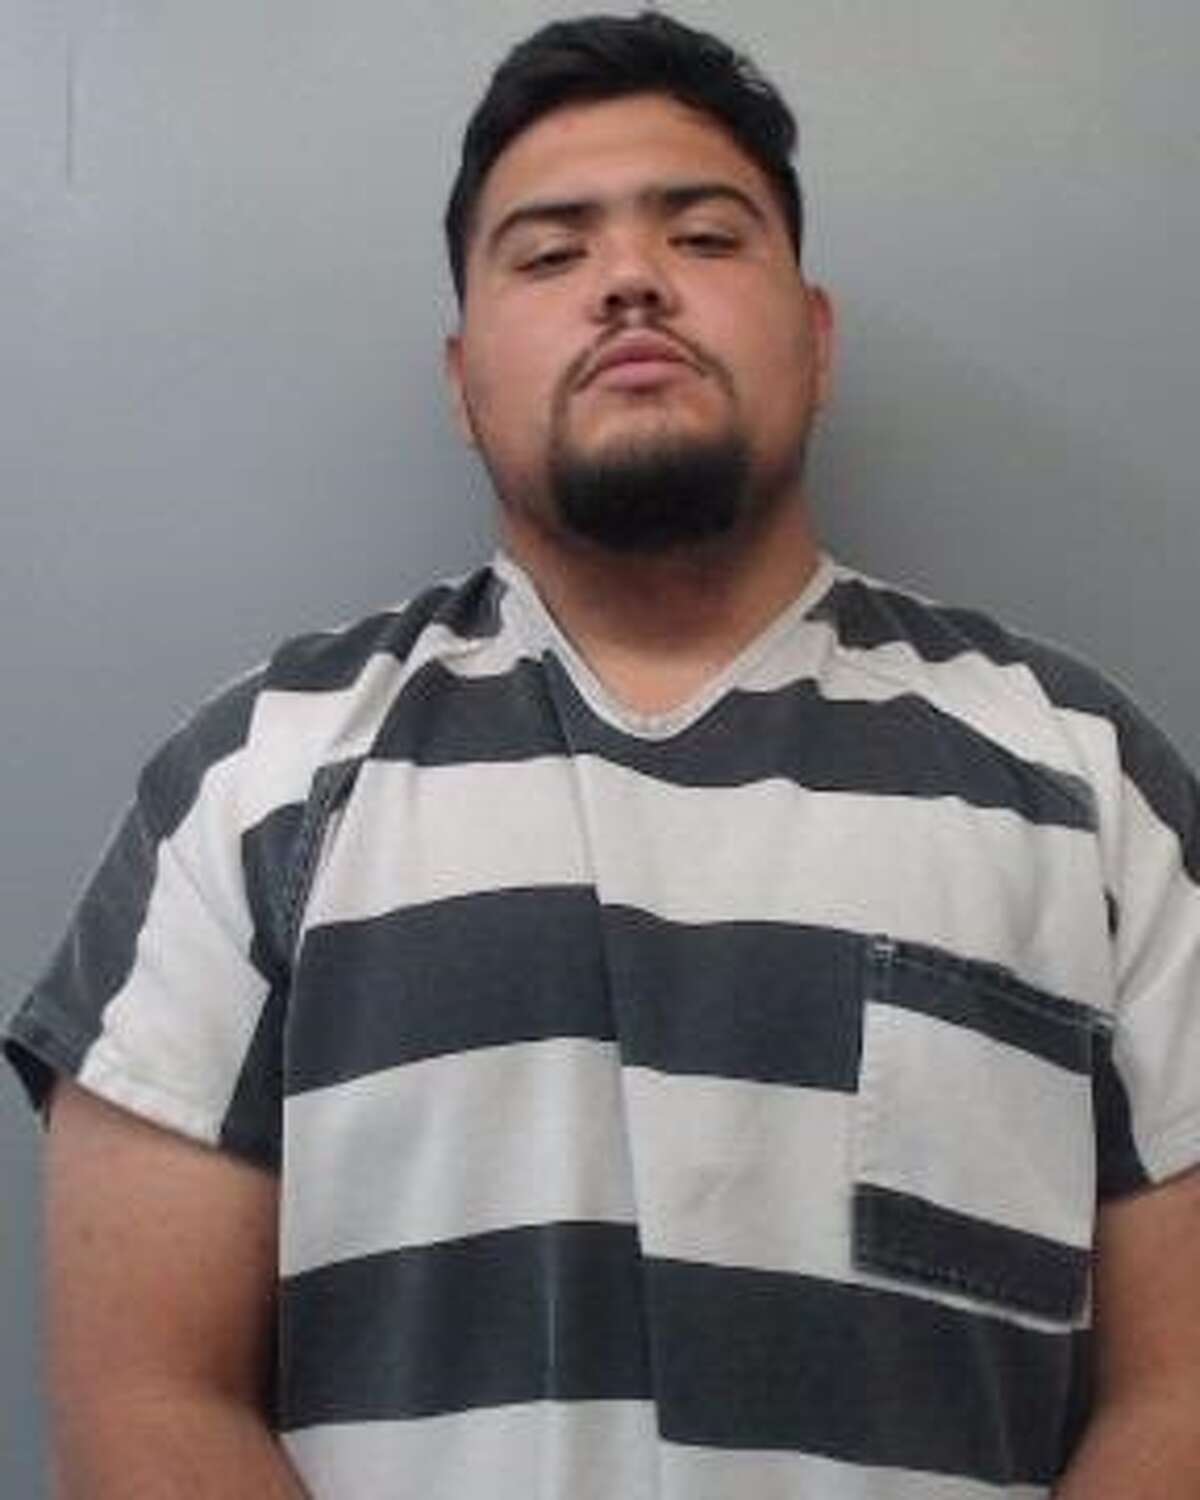 Reynaldo Javier Martinez, 21, was arrested and served with an arrest warrant that charged him with criminal mischief.